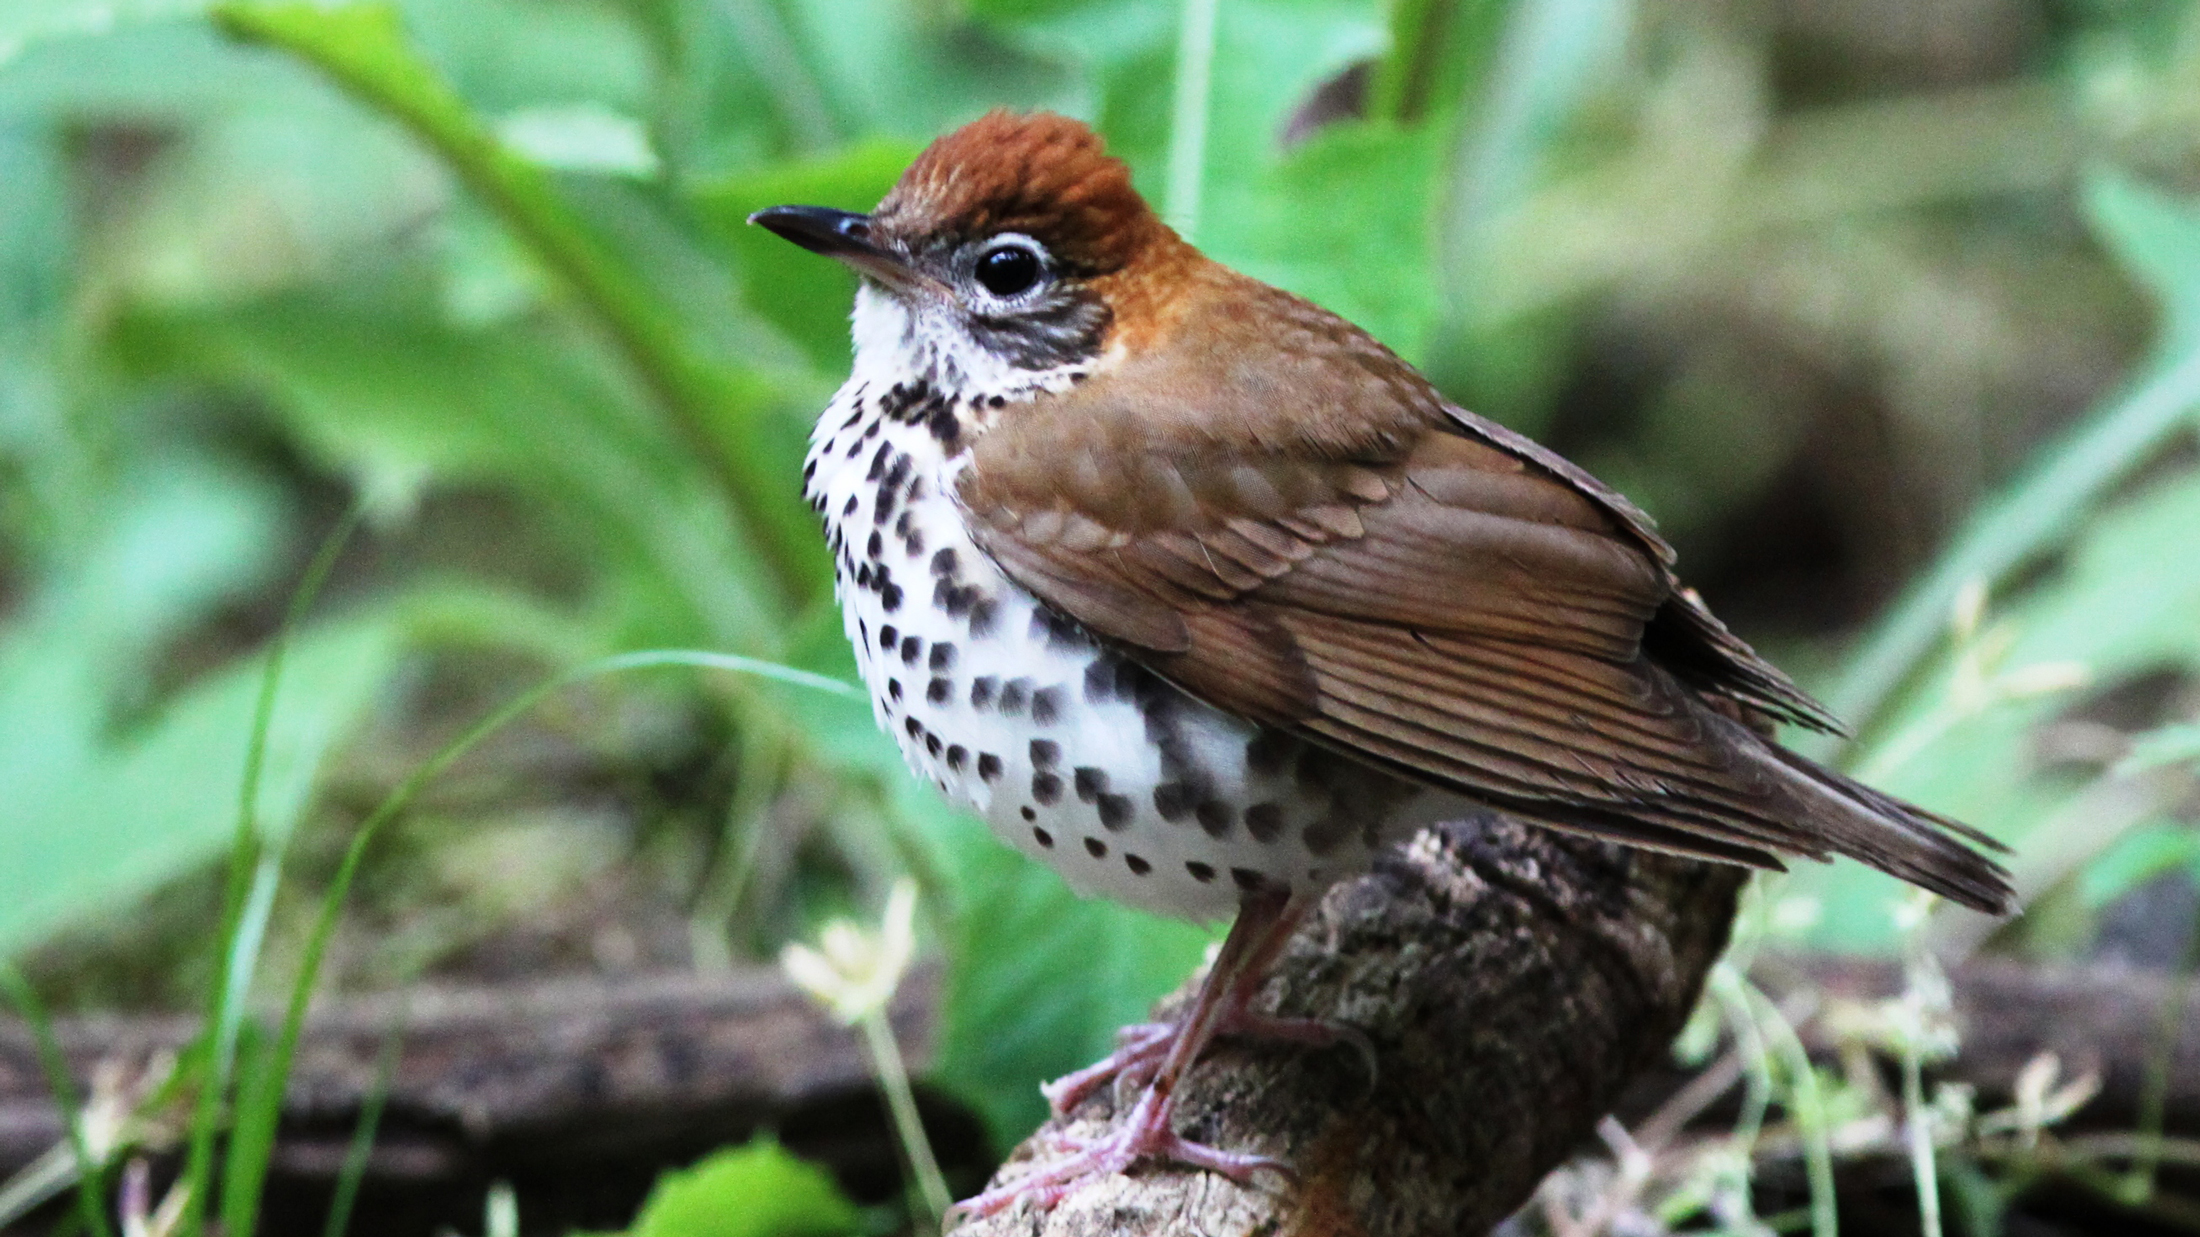 Wood Thrush. Photo © Dennis Cooke / Flickr through a Creative Commons license